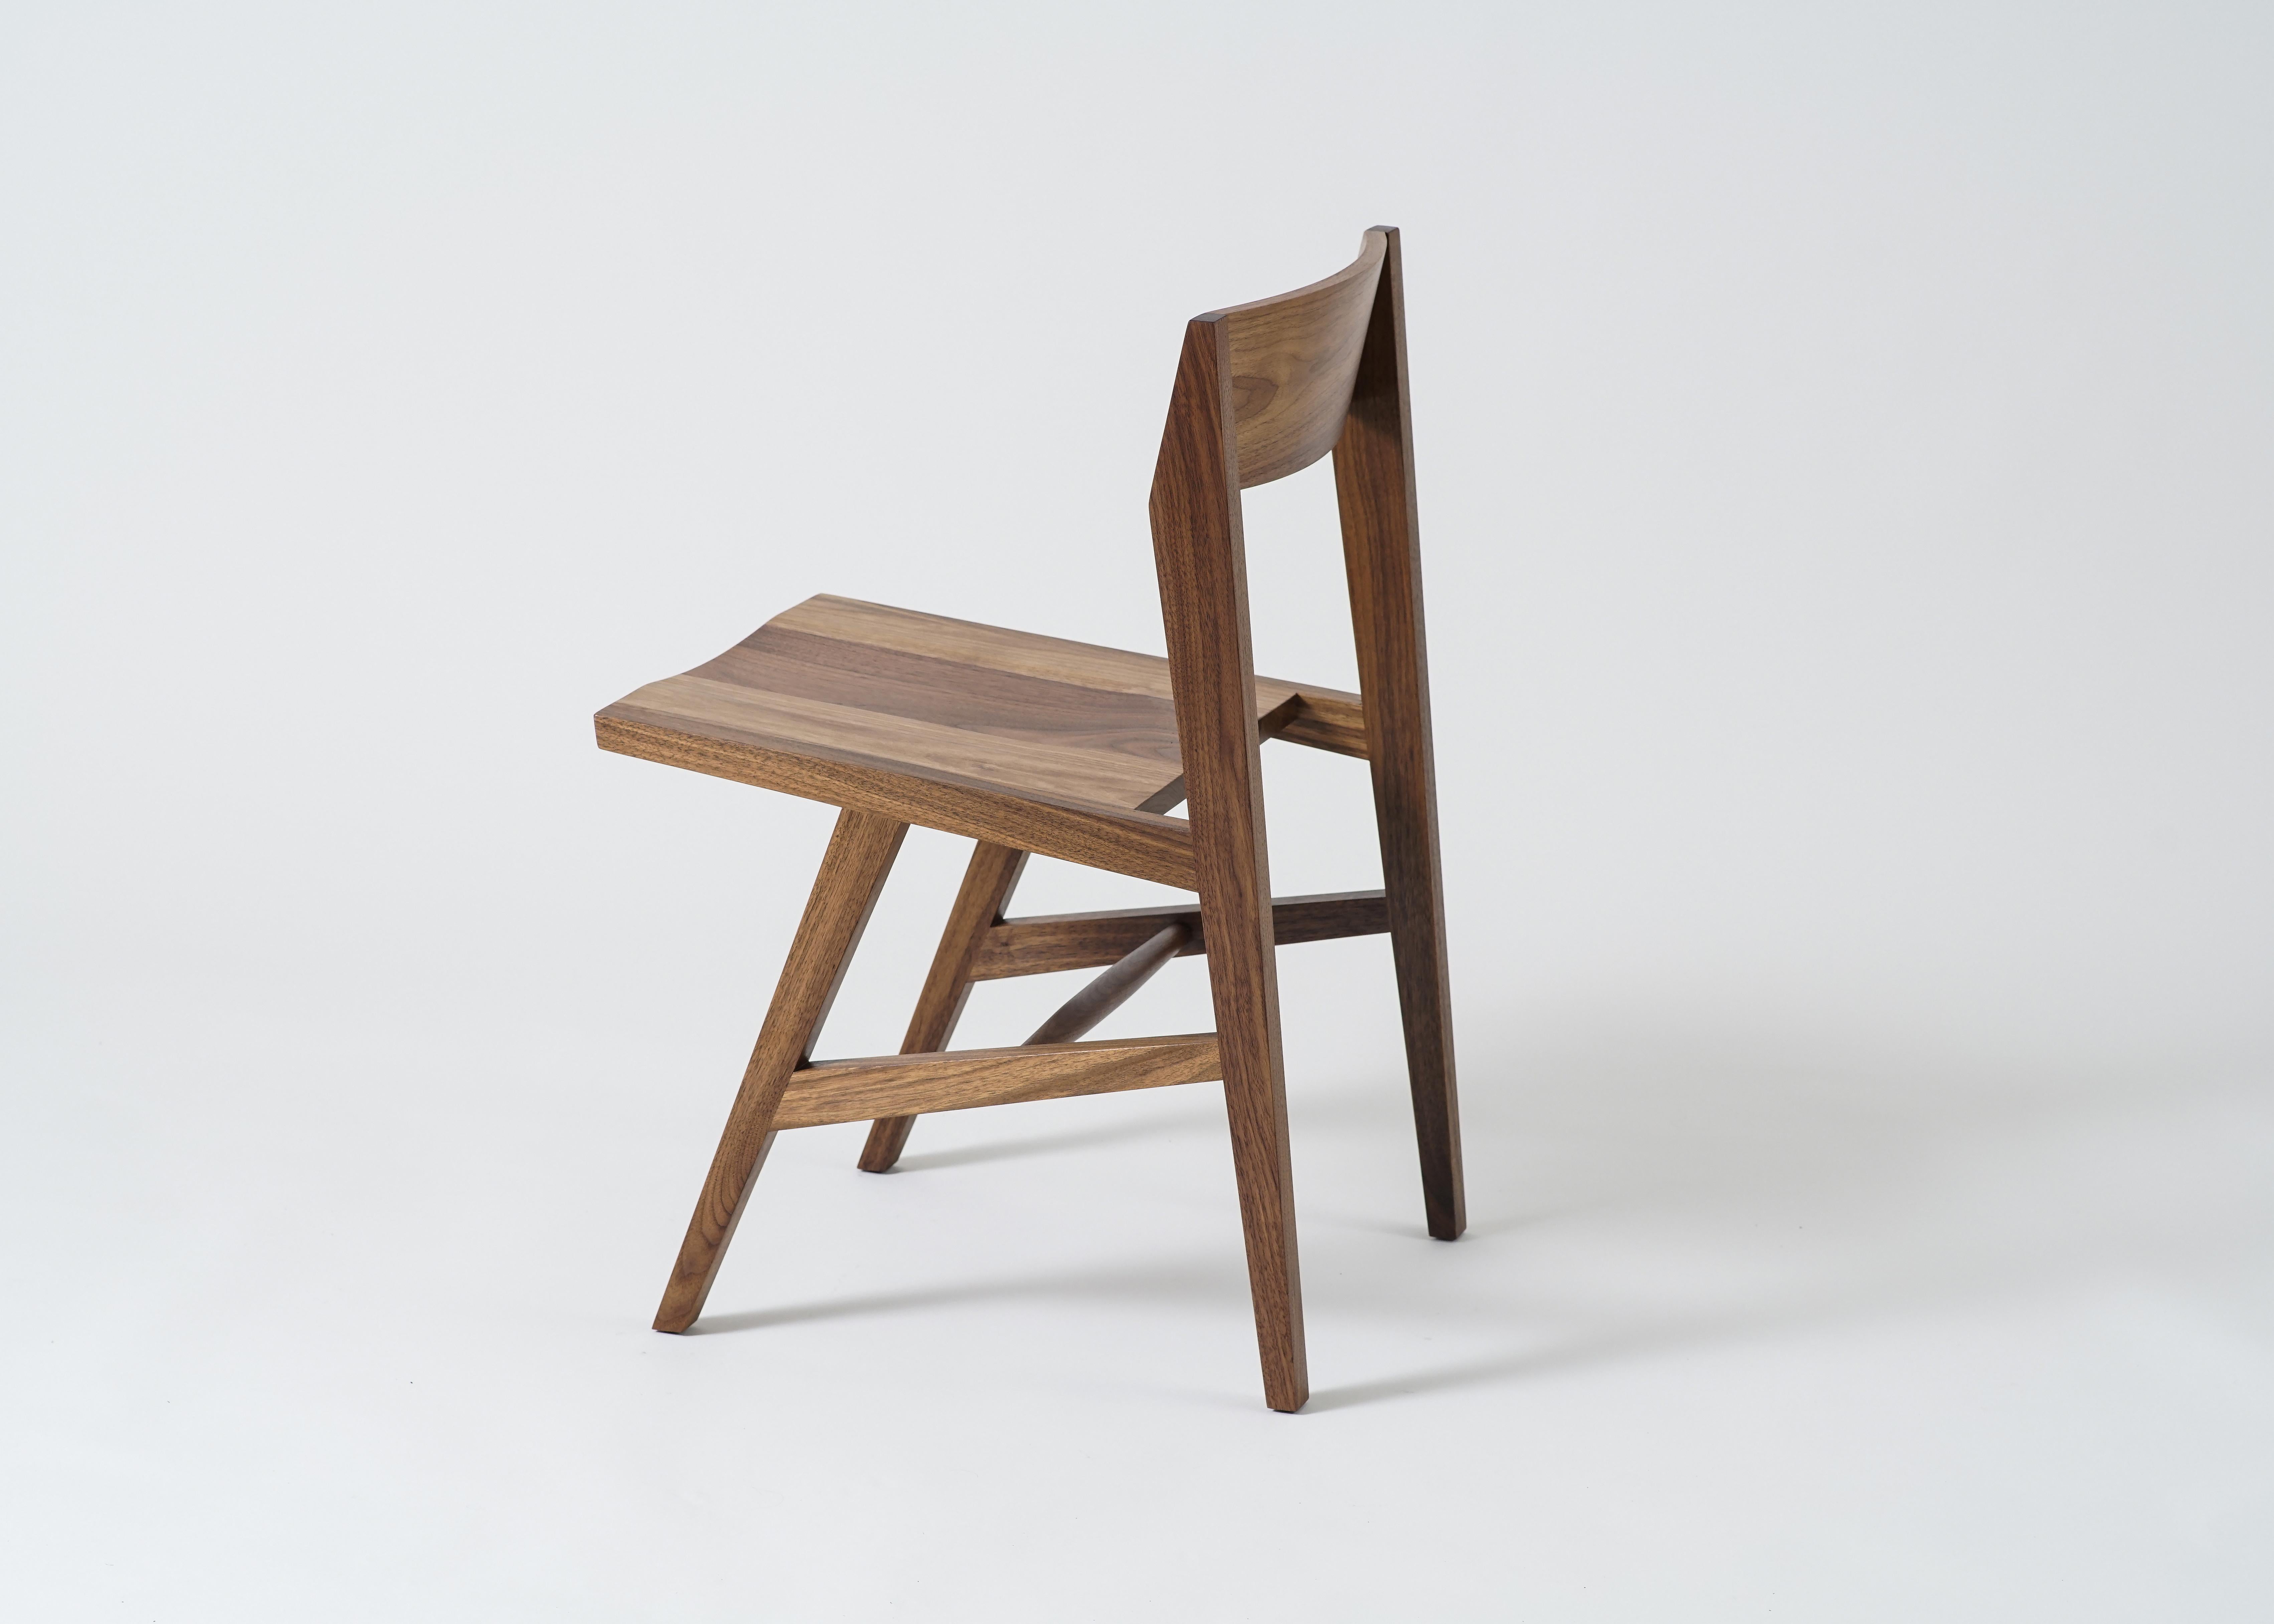 Phloem Studio Jess side chair is a modern contemporary solid wood dining chair in white oak with tapered hardwood legs and a solid wood laminated curved back. The seat has a carved relief for comfort. Appropriate as both a dining chair or occasional